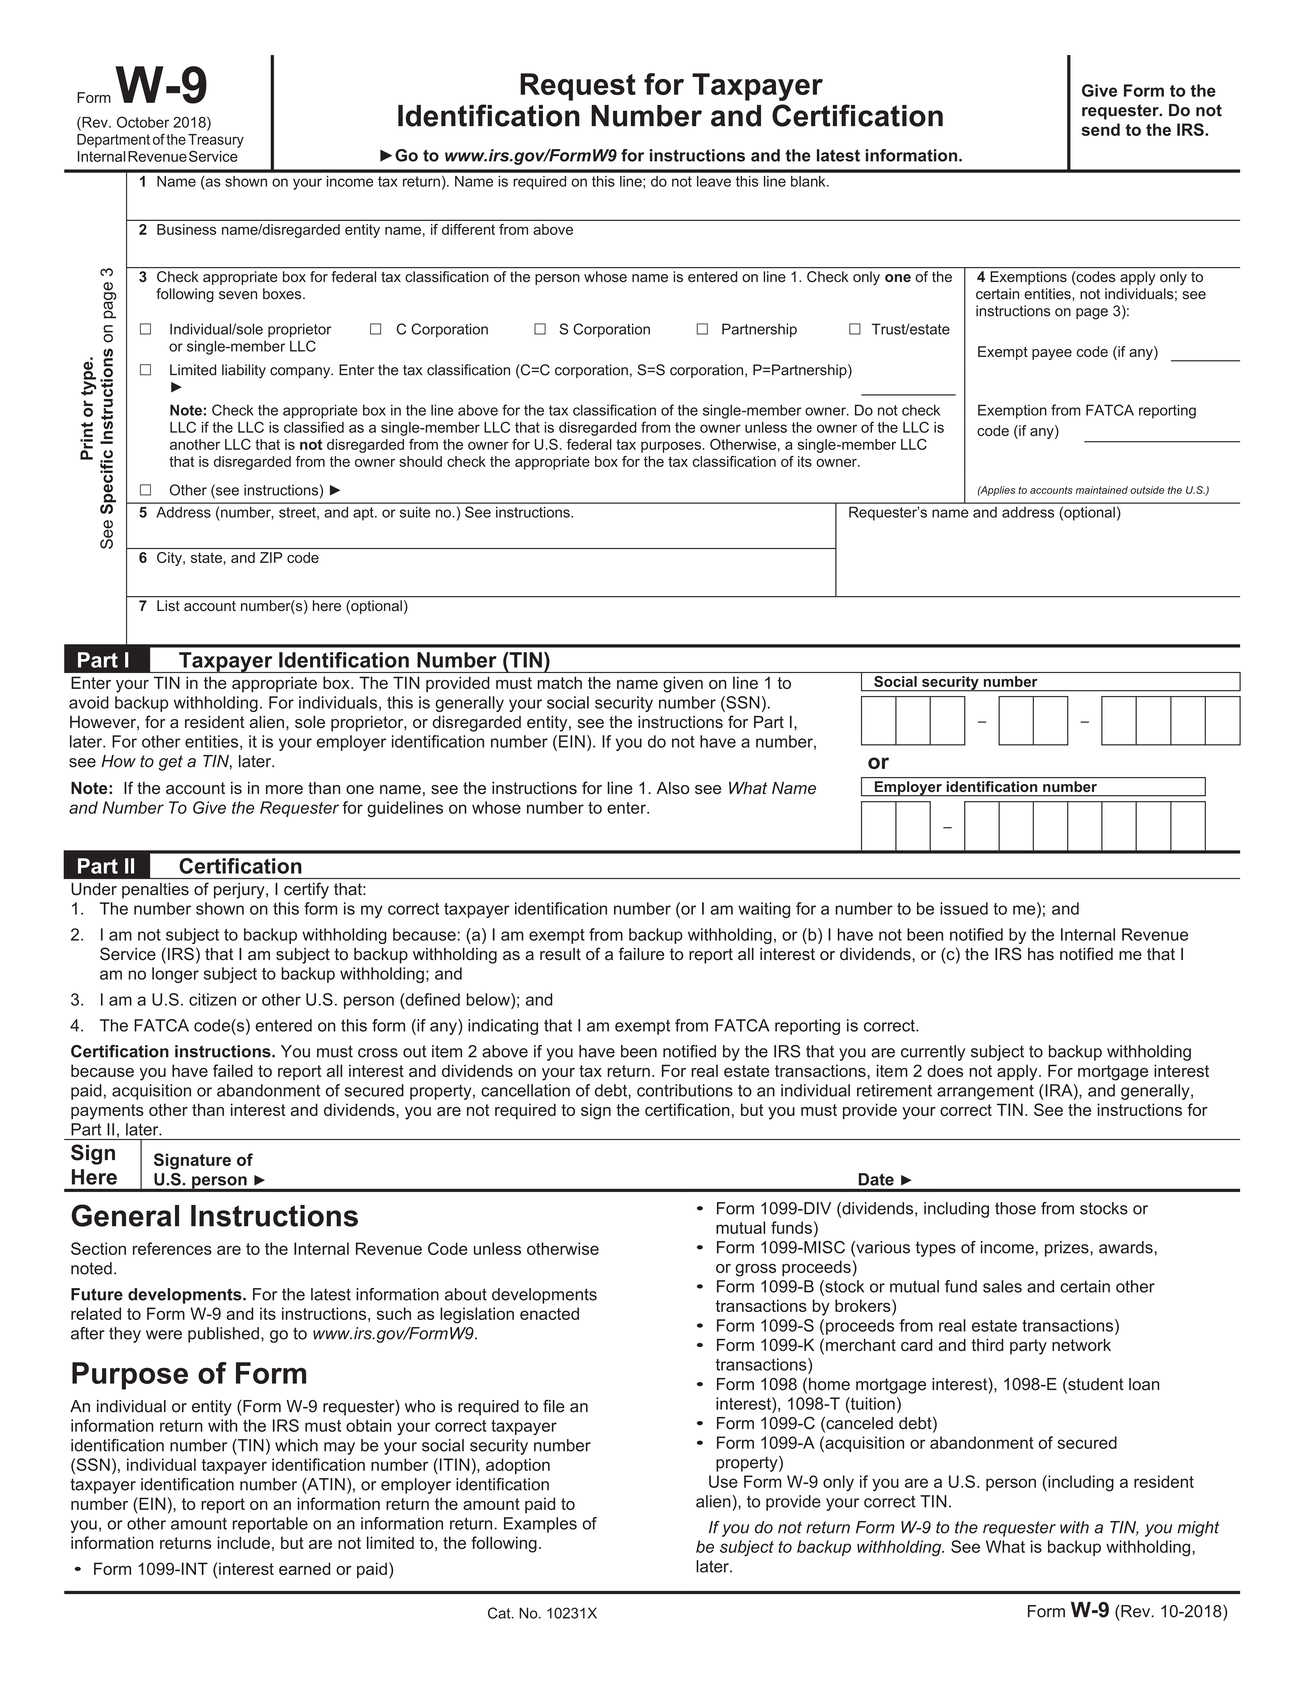 New Microsoft Word Document_exhibitpage099_page001.jpg